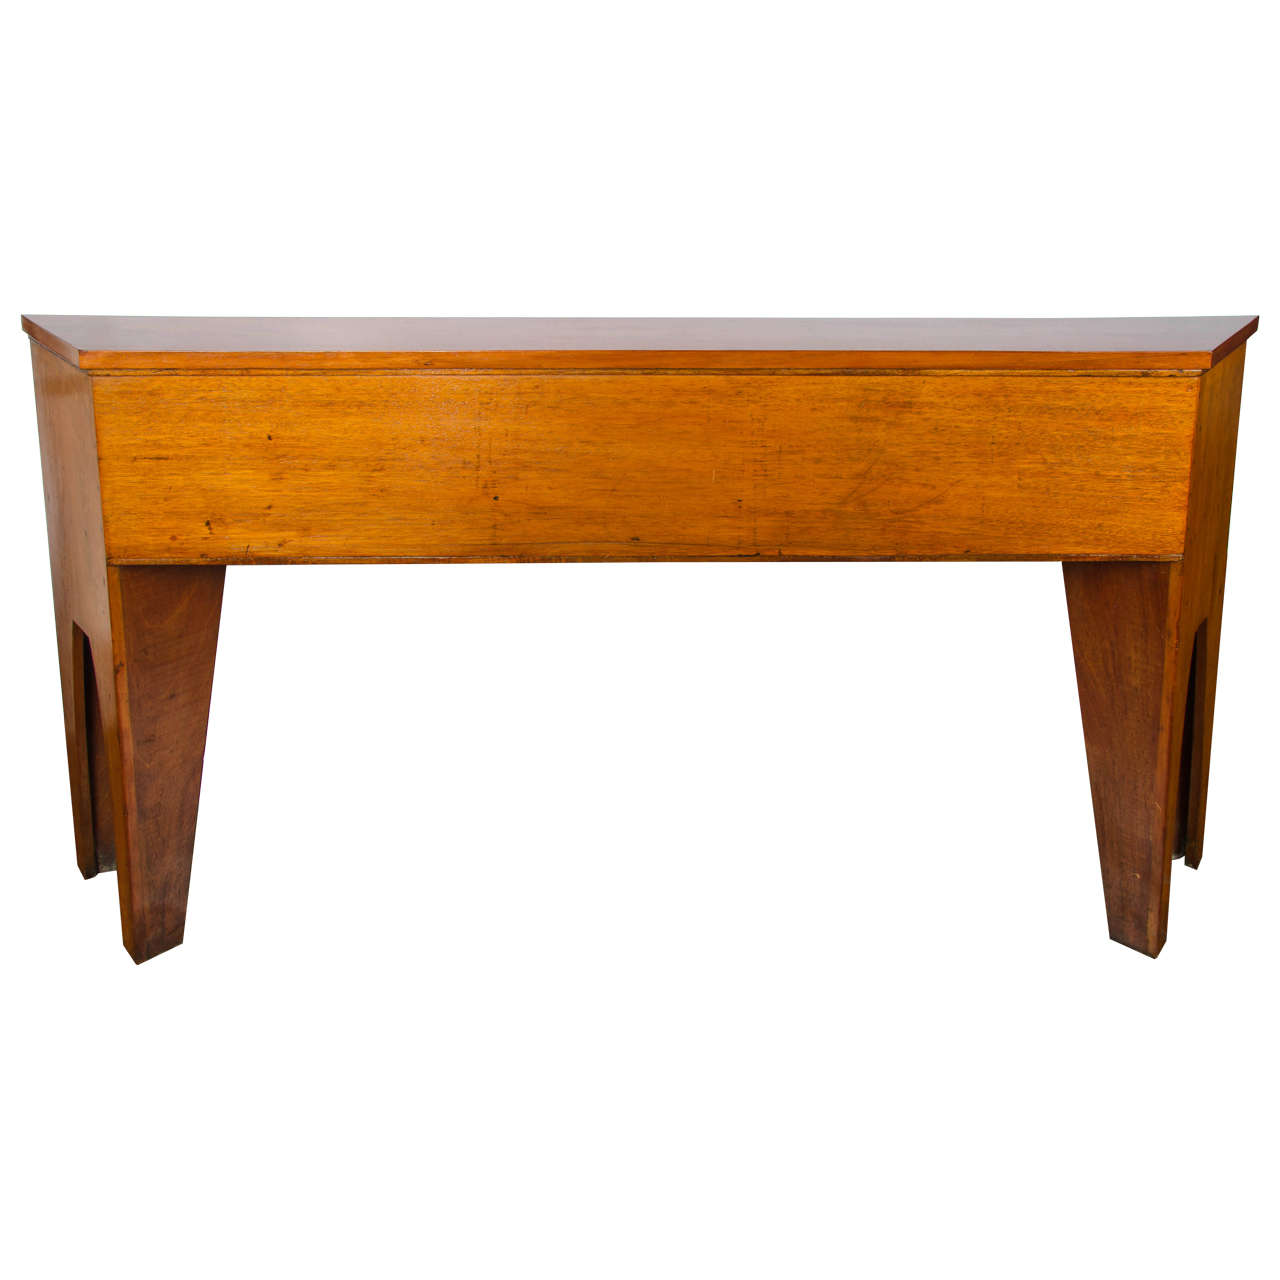 1920-1930 English Console Table